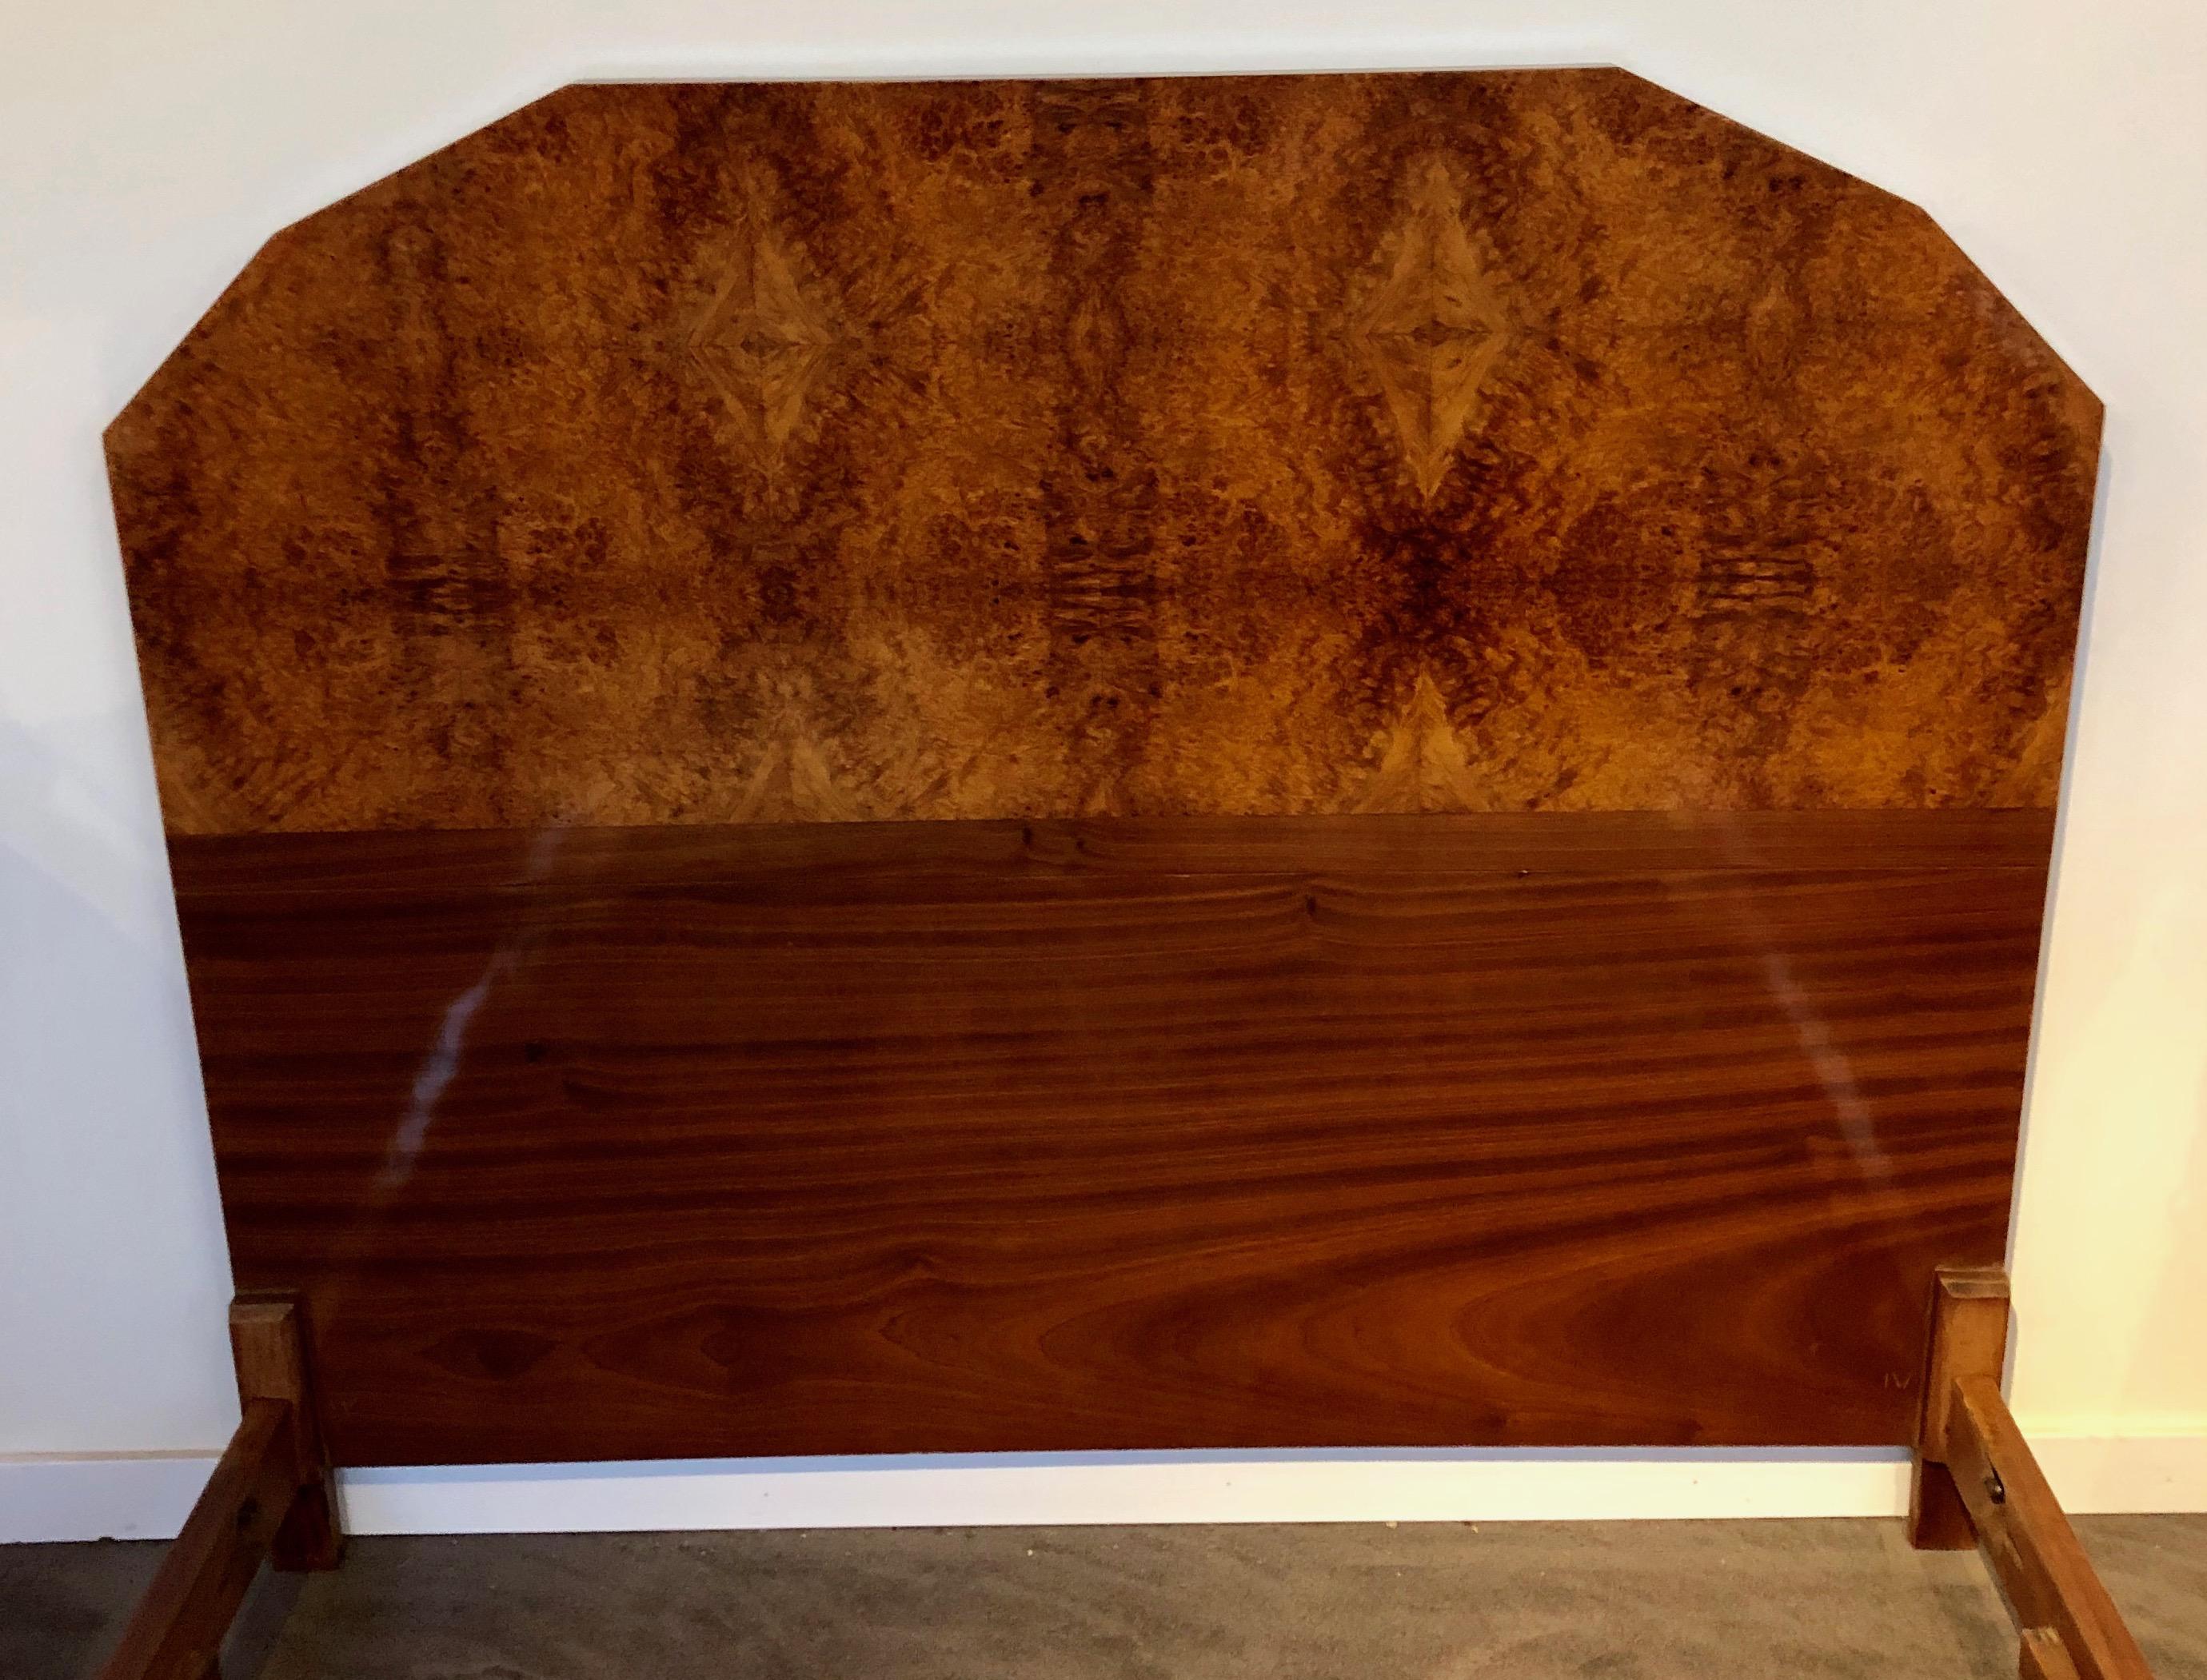 1930s French Art Deco bed frame. Spectacular exotic European bookmatched burl walnut. Converted to fit a standard queen size bed. Modernist design with stepped curved footboard and matching side rails.
The centerpiece for the beginning of any